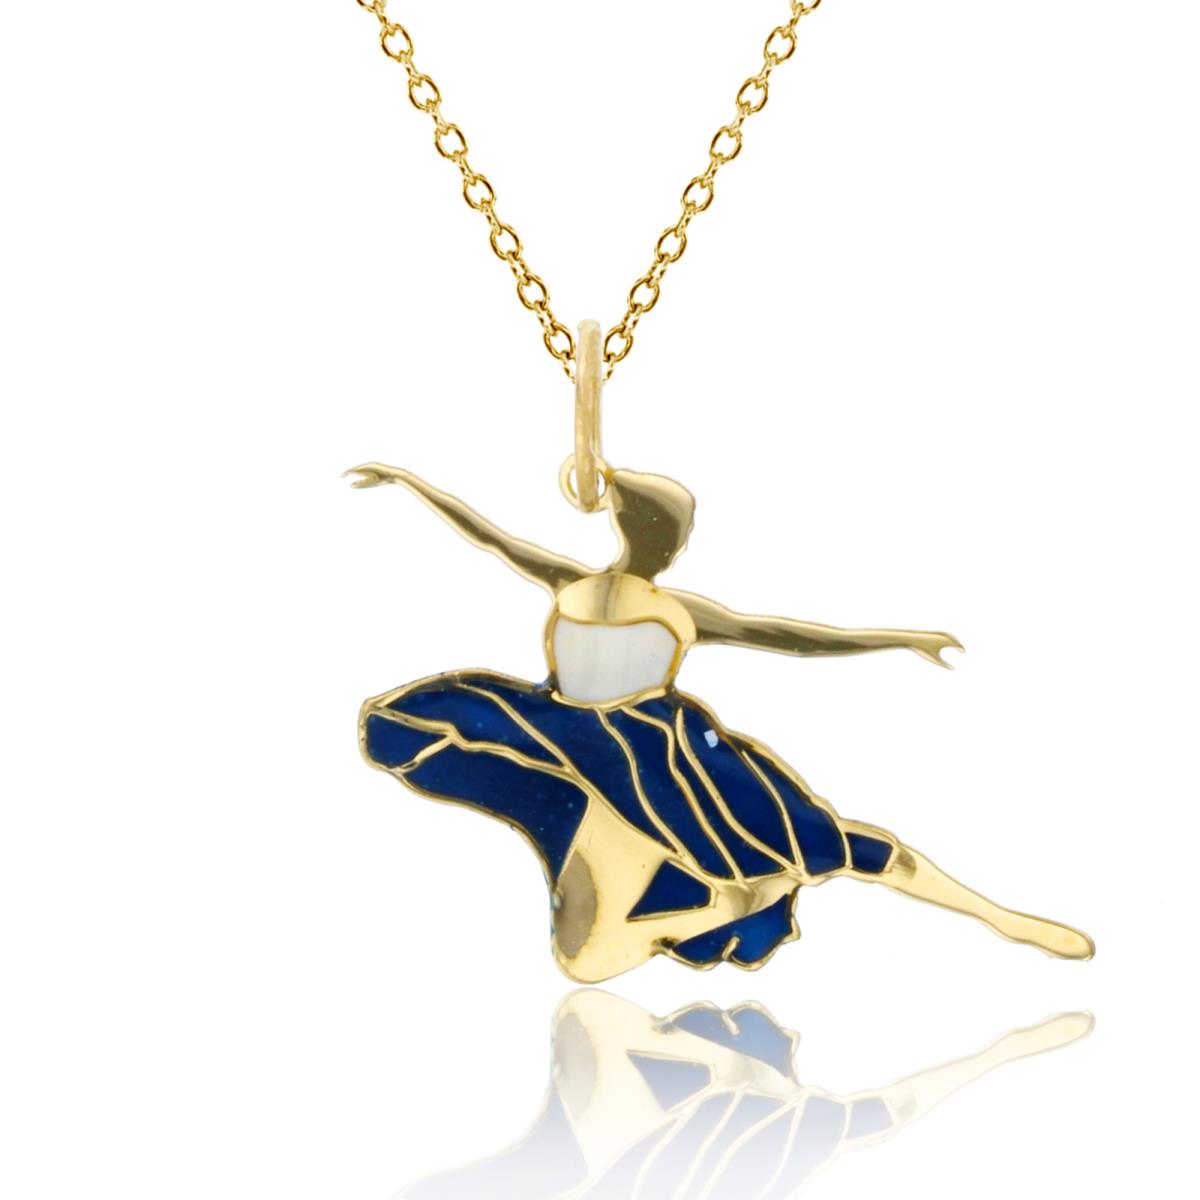 14K Yellow Gold White & Blue Enamel 25x23mm Jumping Ballerina 18" 020 Rolo Chain Necklace